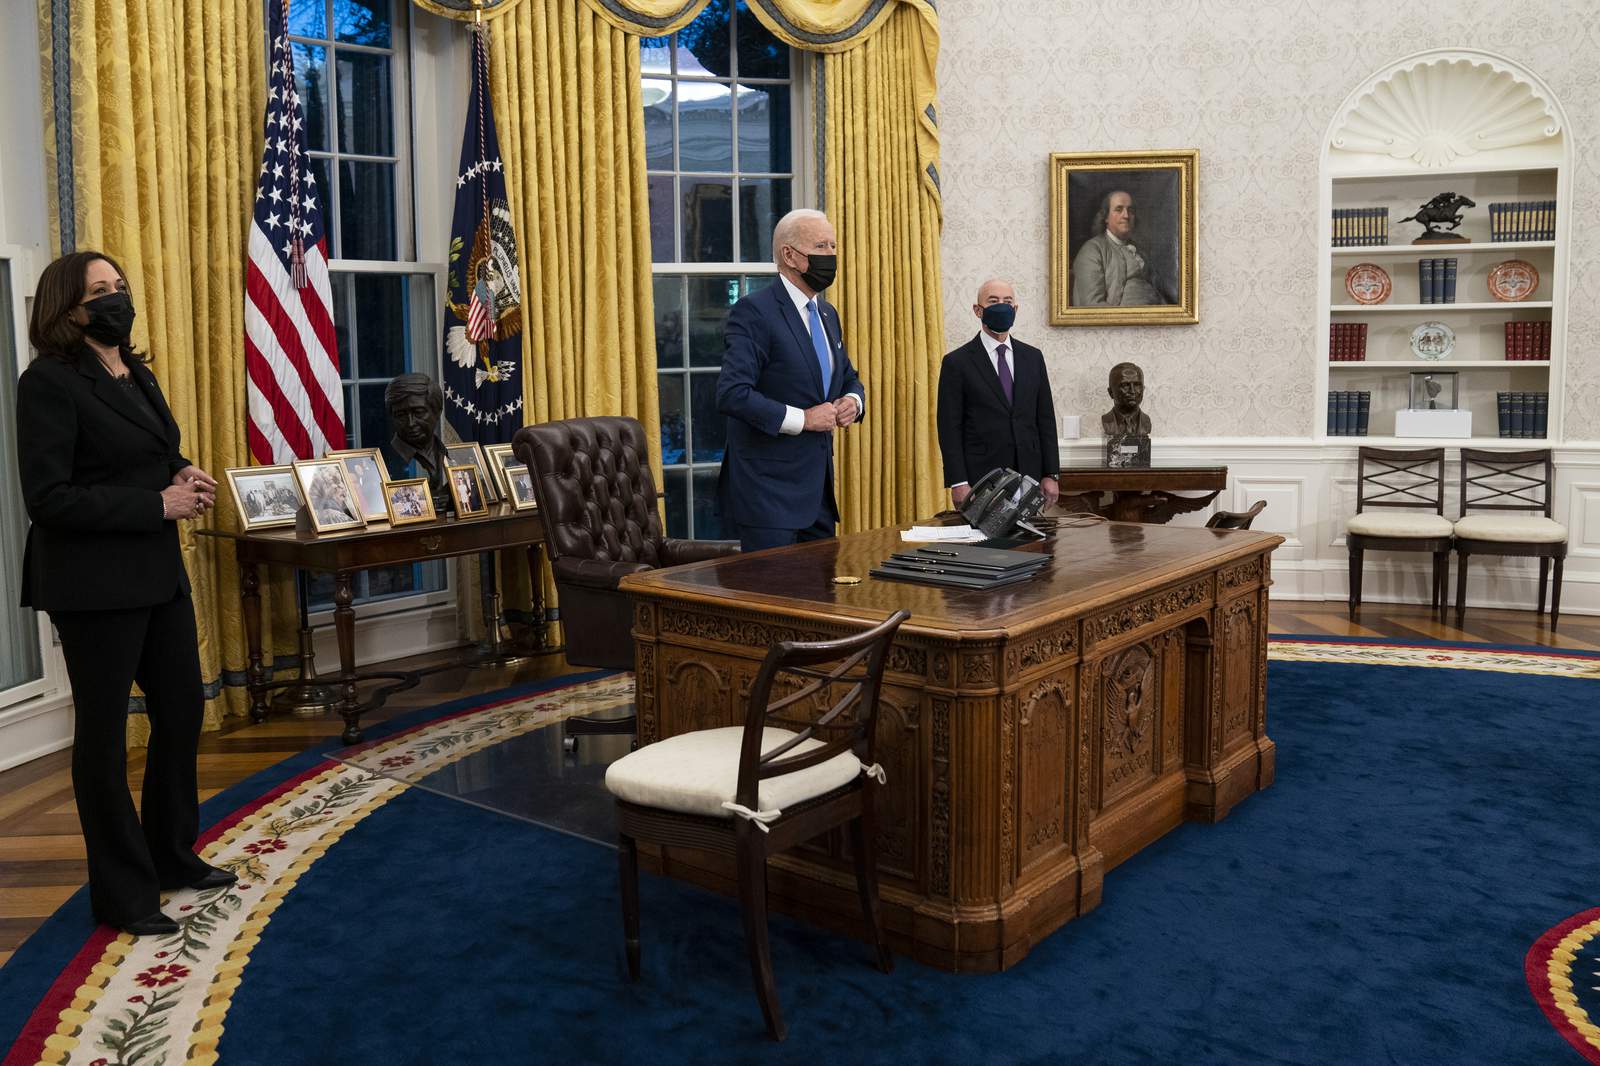 AP-NORC Poll: Americans open to Biden's approach to crises